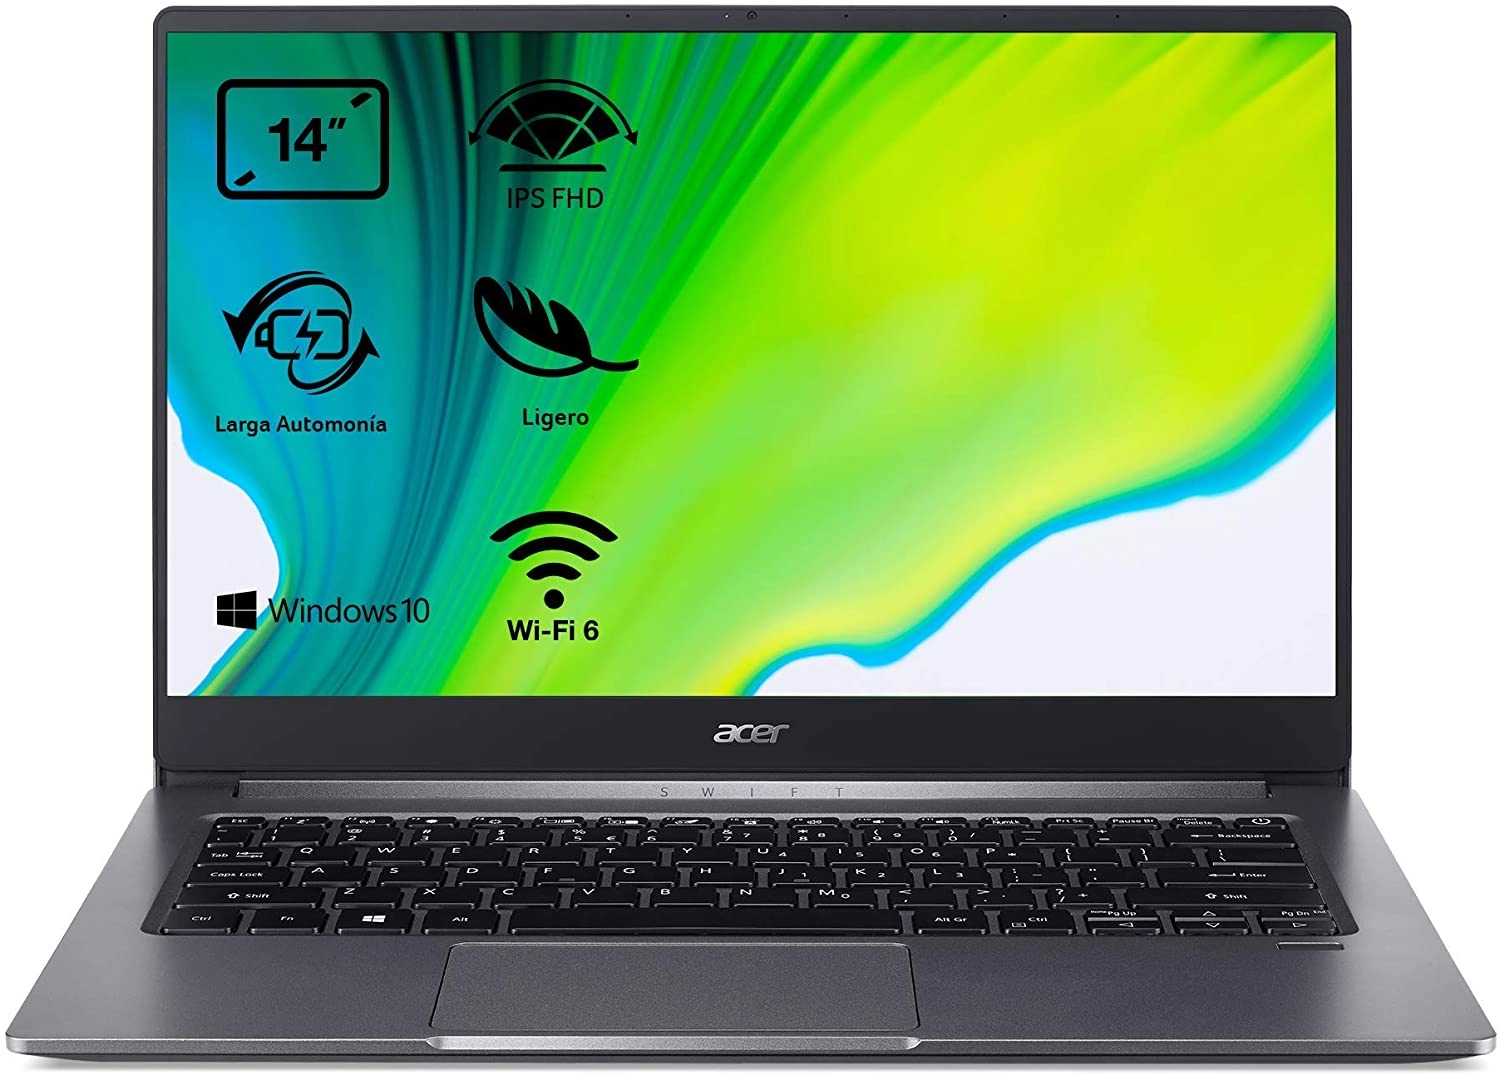 Acer SF314-57 laptop image